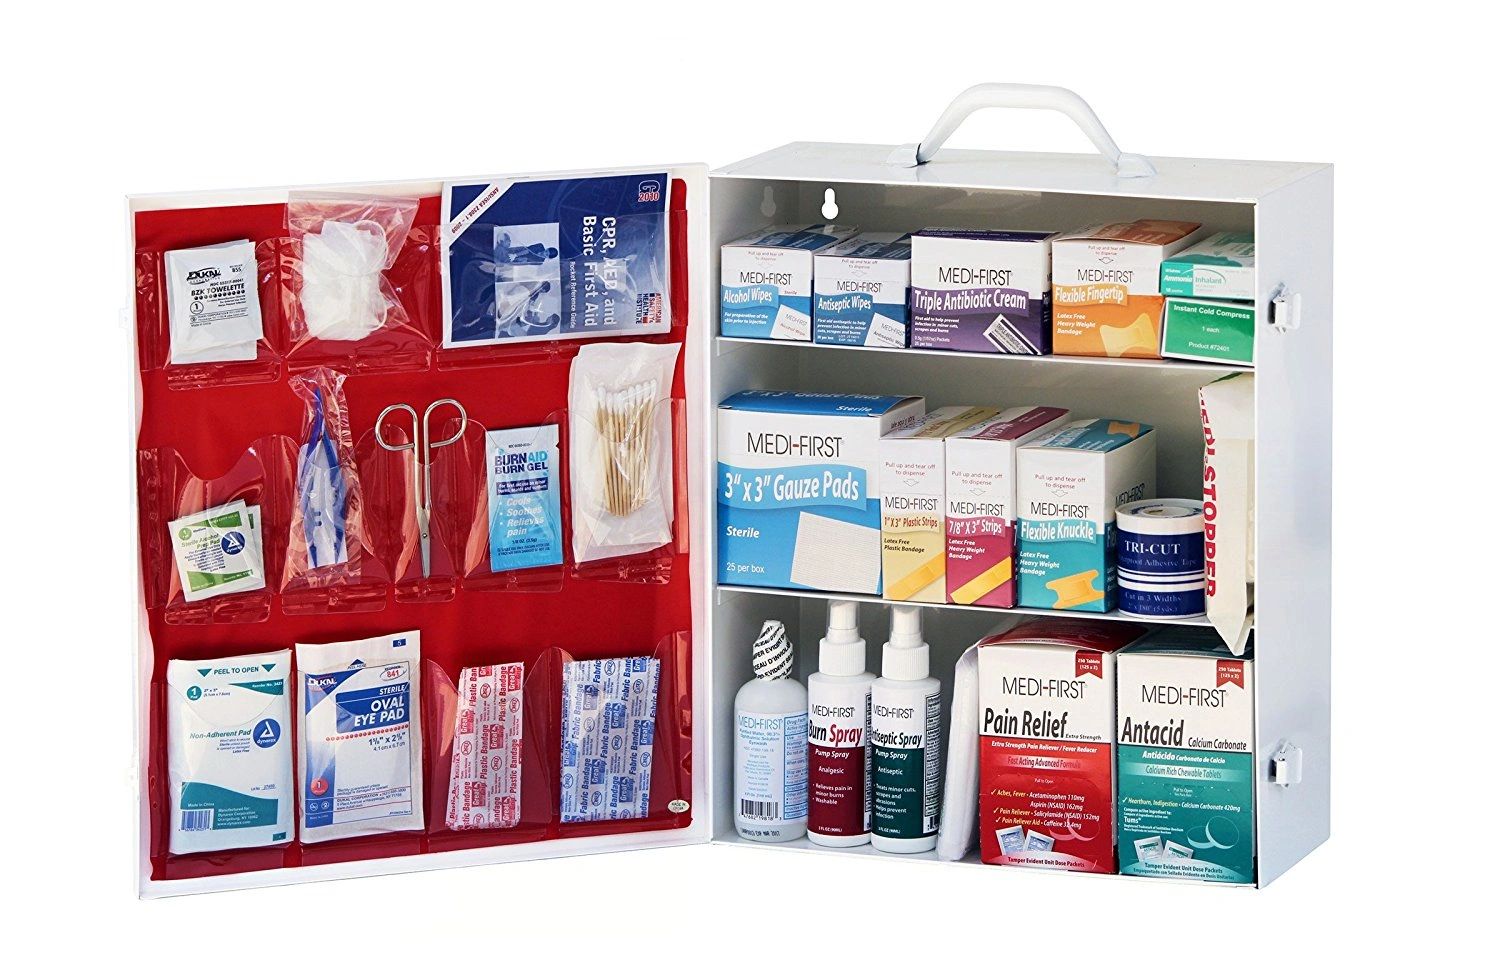 Rapid City First Aid Kit Supplies